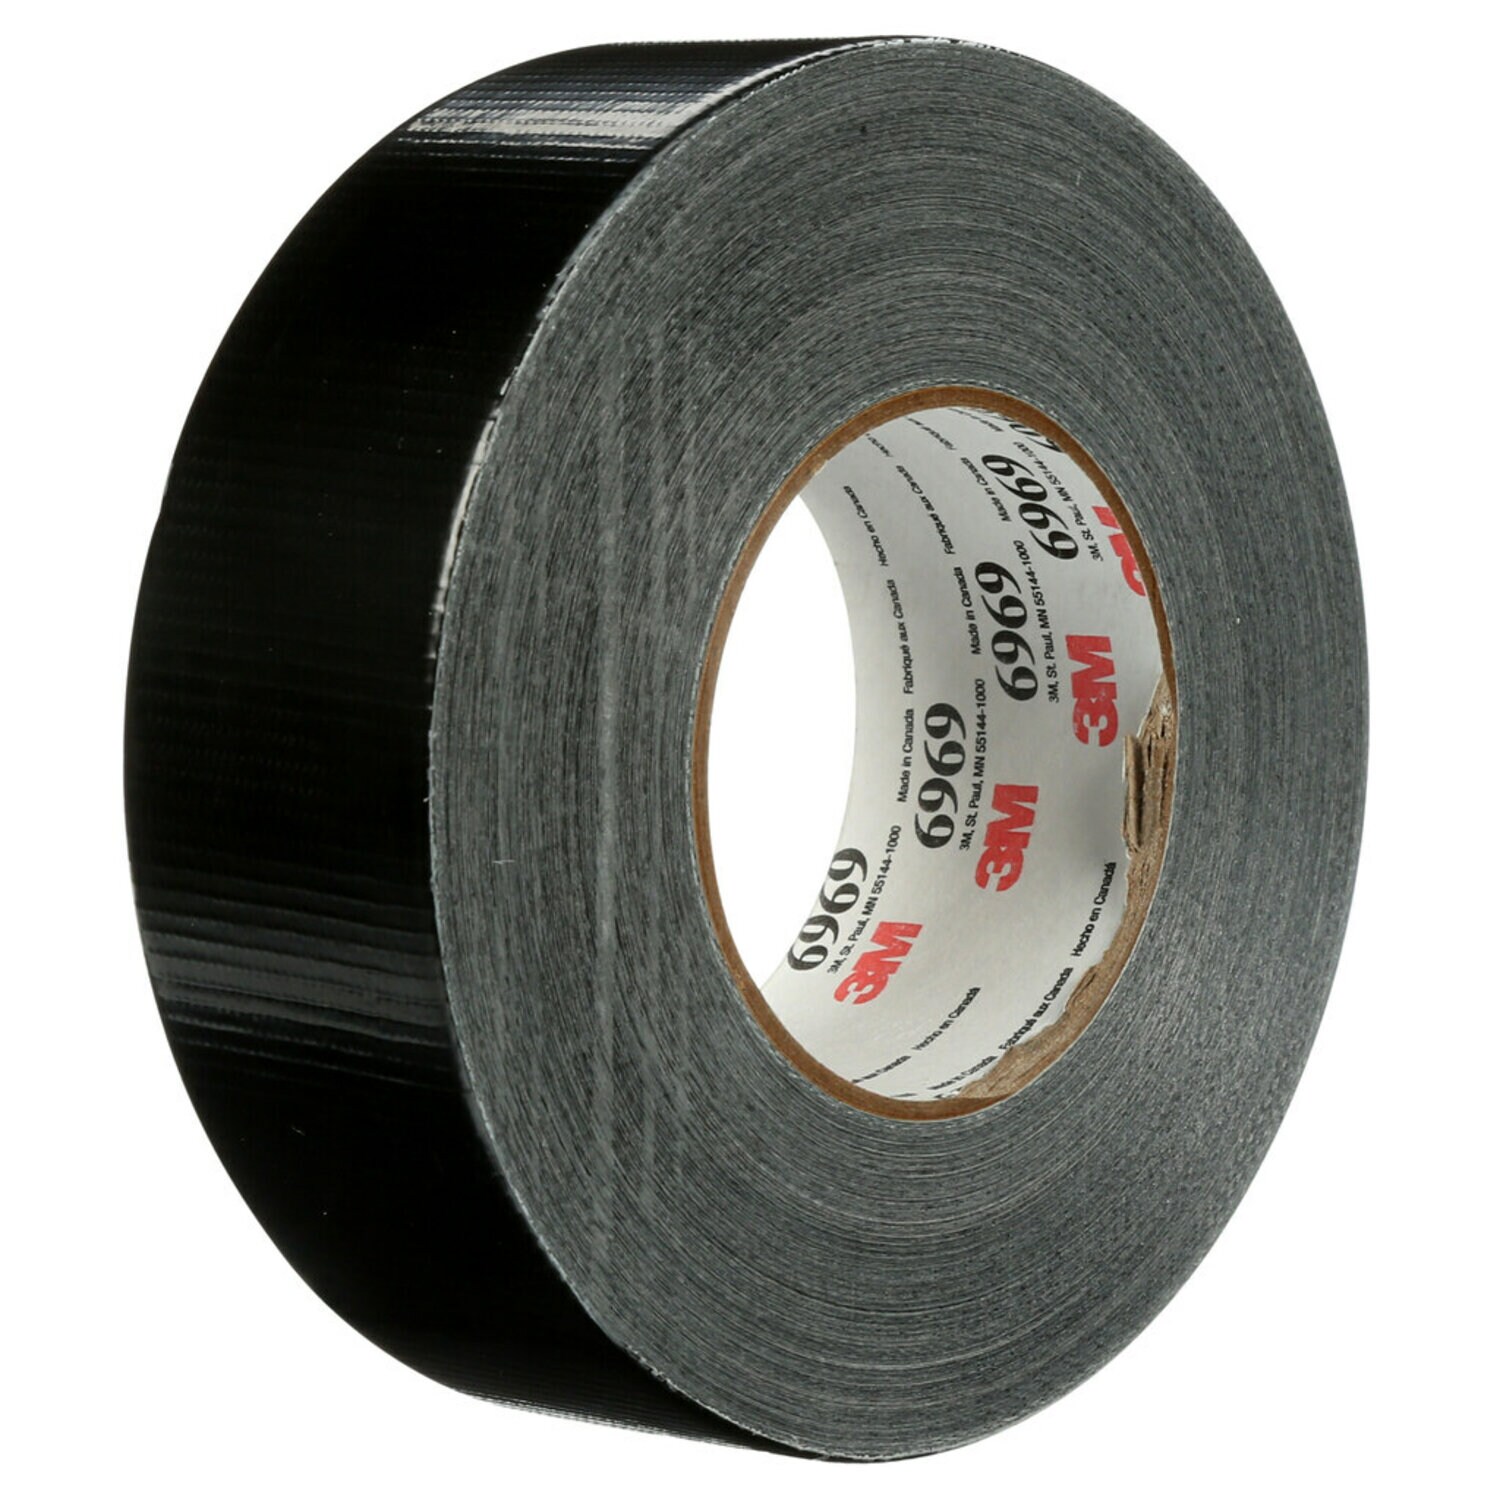 7000001232 - 3M Extra Heavy Duty Duct Tape 6969, Black, 48 mm x 54.8 m, 10.7 mil, 24
Roll/Case, Individually Wrapped Conveniently Packaged